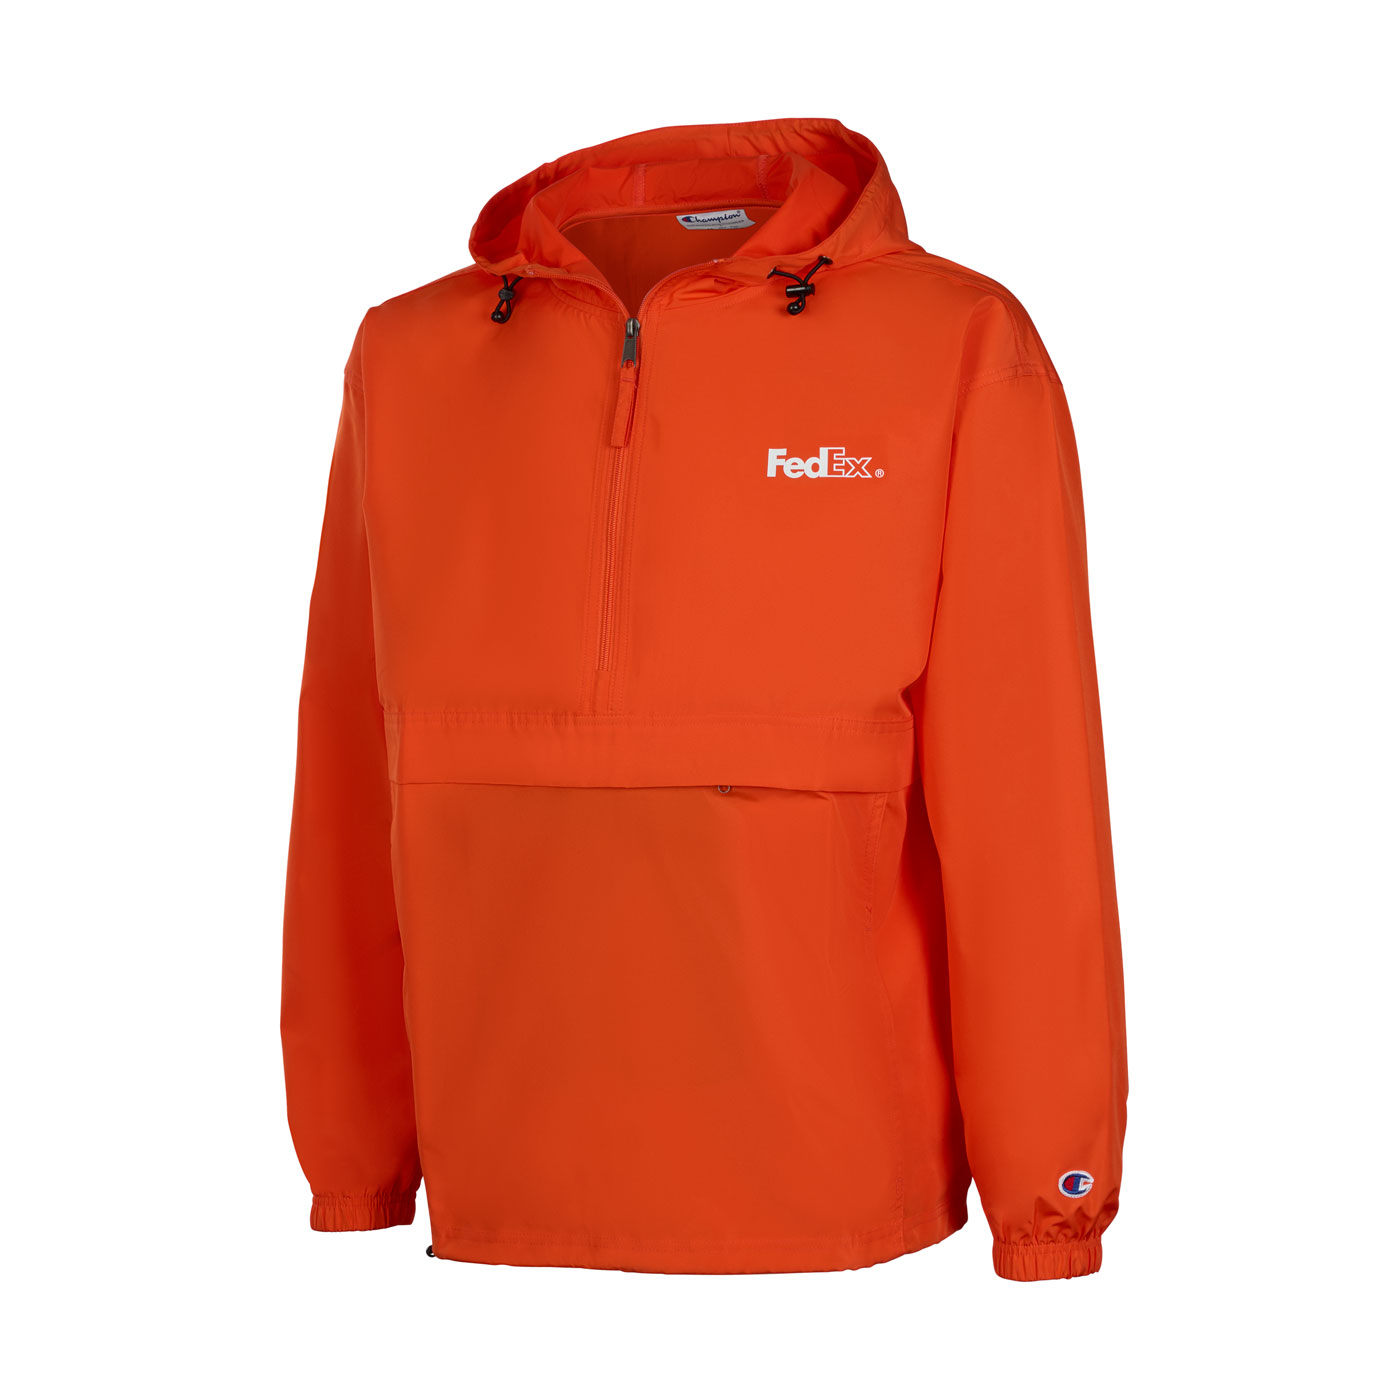 FedEx Champion® Packable Jacket | The FedEx Company Store